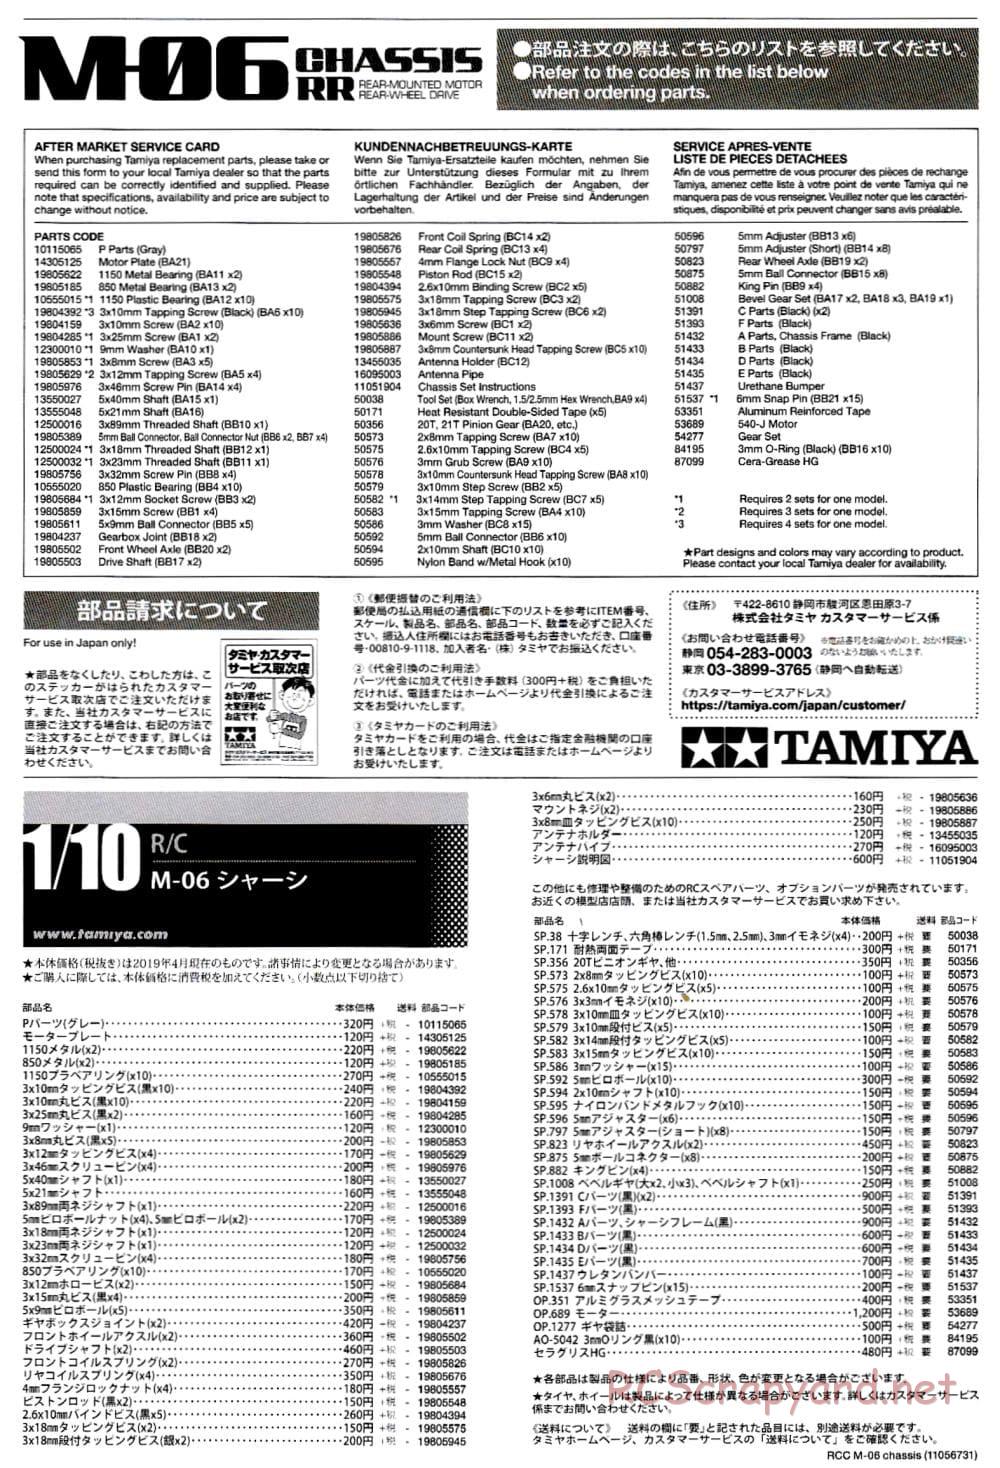 Tamiya - Volkswagen Type 2 (T1) - M-06 Chassis - Body Manual - Page 7